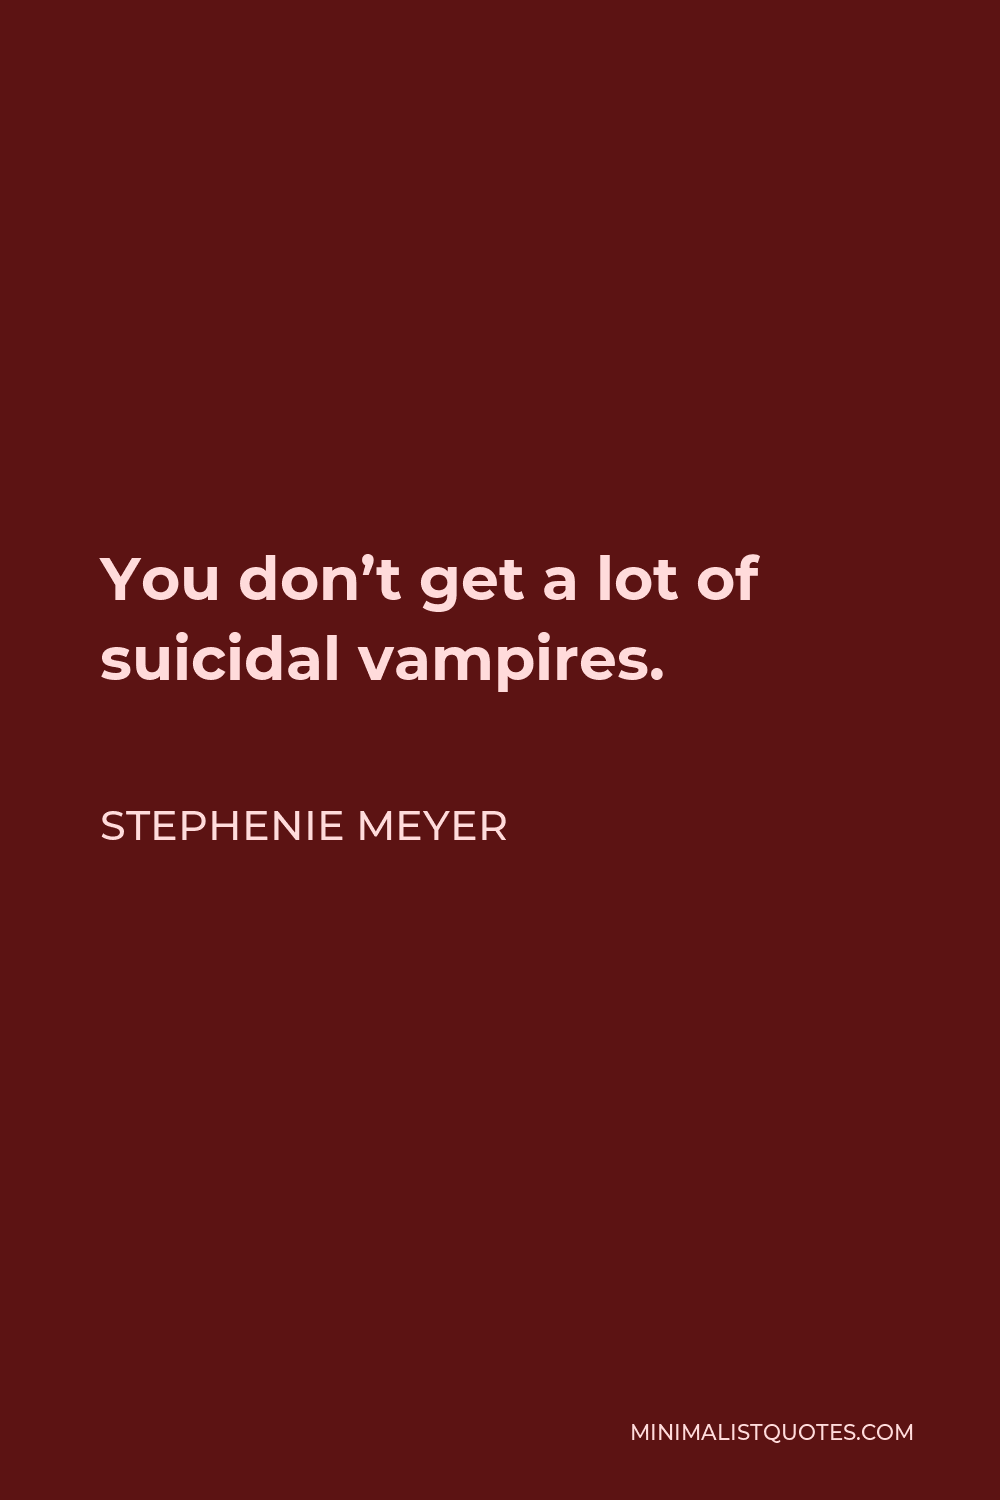 Stephenie Meyer Quote - You don’t get a lot of suicidal vampires.